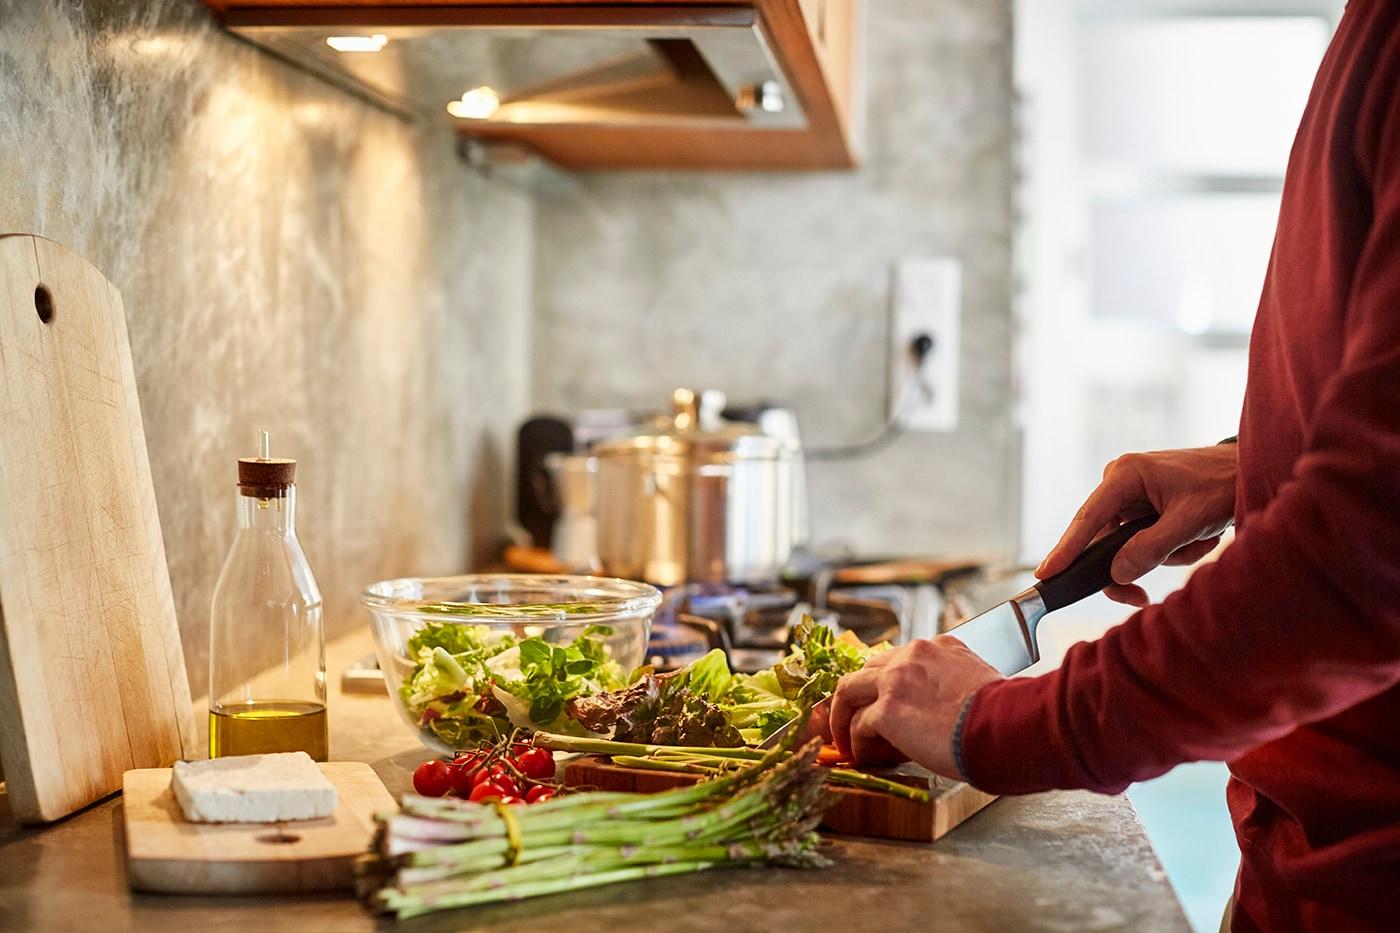 A person in a red shirt chops vegetables on a cutting board. On the counter is lettuce, tomatoes, zucchini, olive oil and a block of feta cheese.